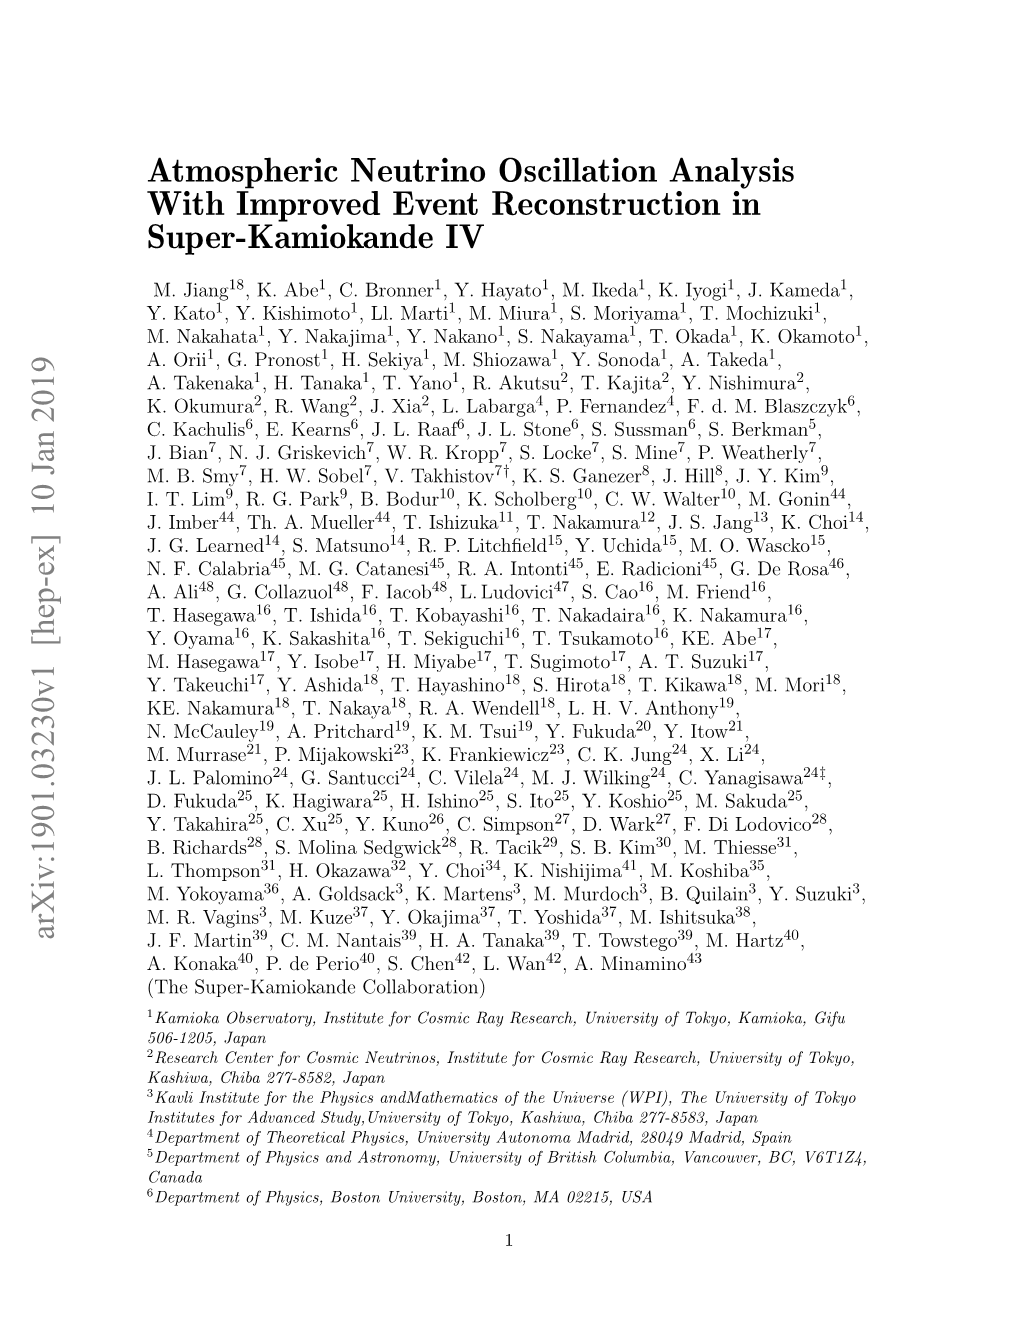 Atmospheric Neutrino Oscillation Analysis with Improved Event Reconstruction in Super-Kamiokande IV